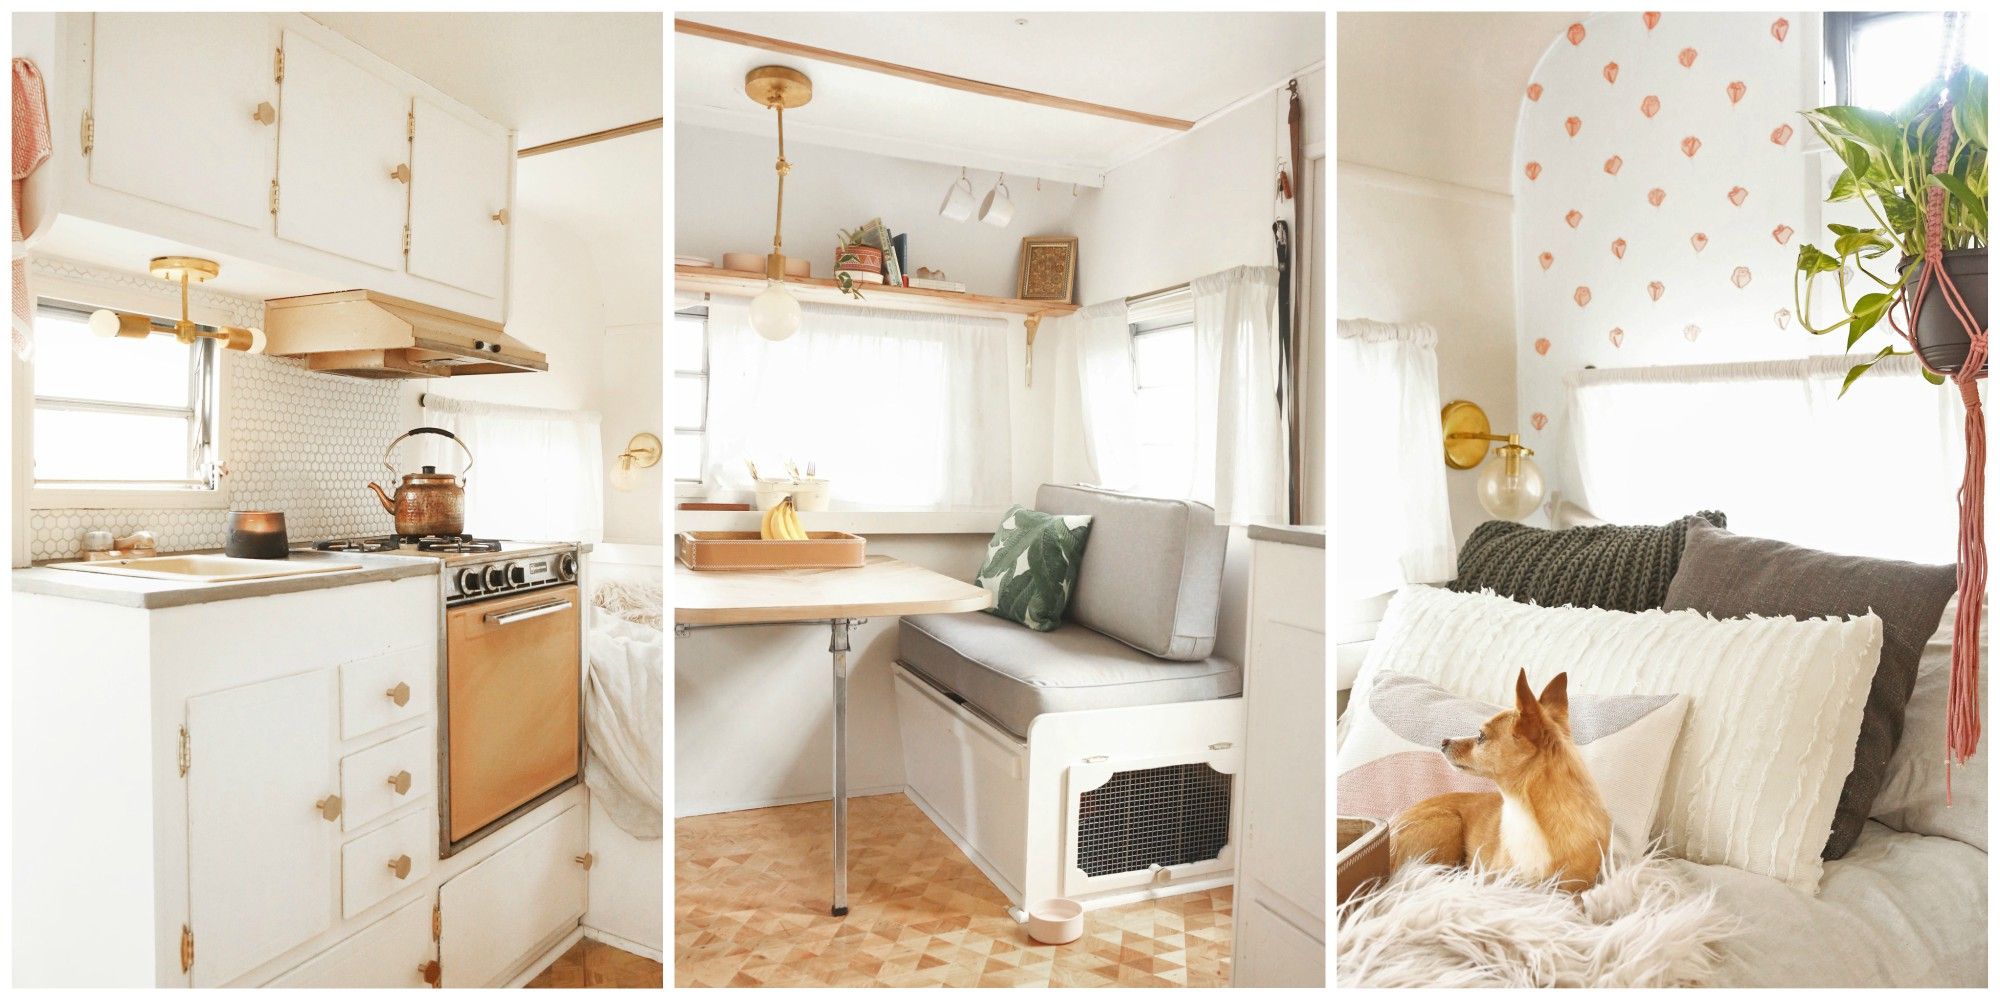 This 1994 RV Camper Got An Insanely Chic Makeover for Just 5000